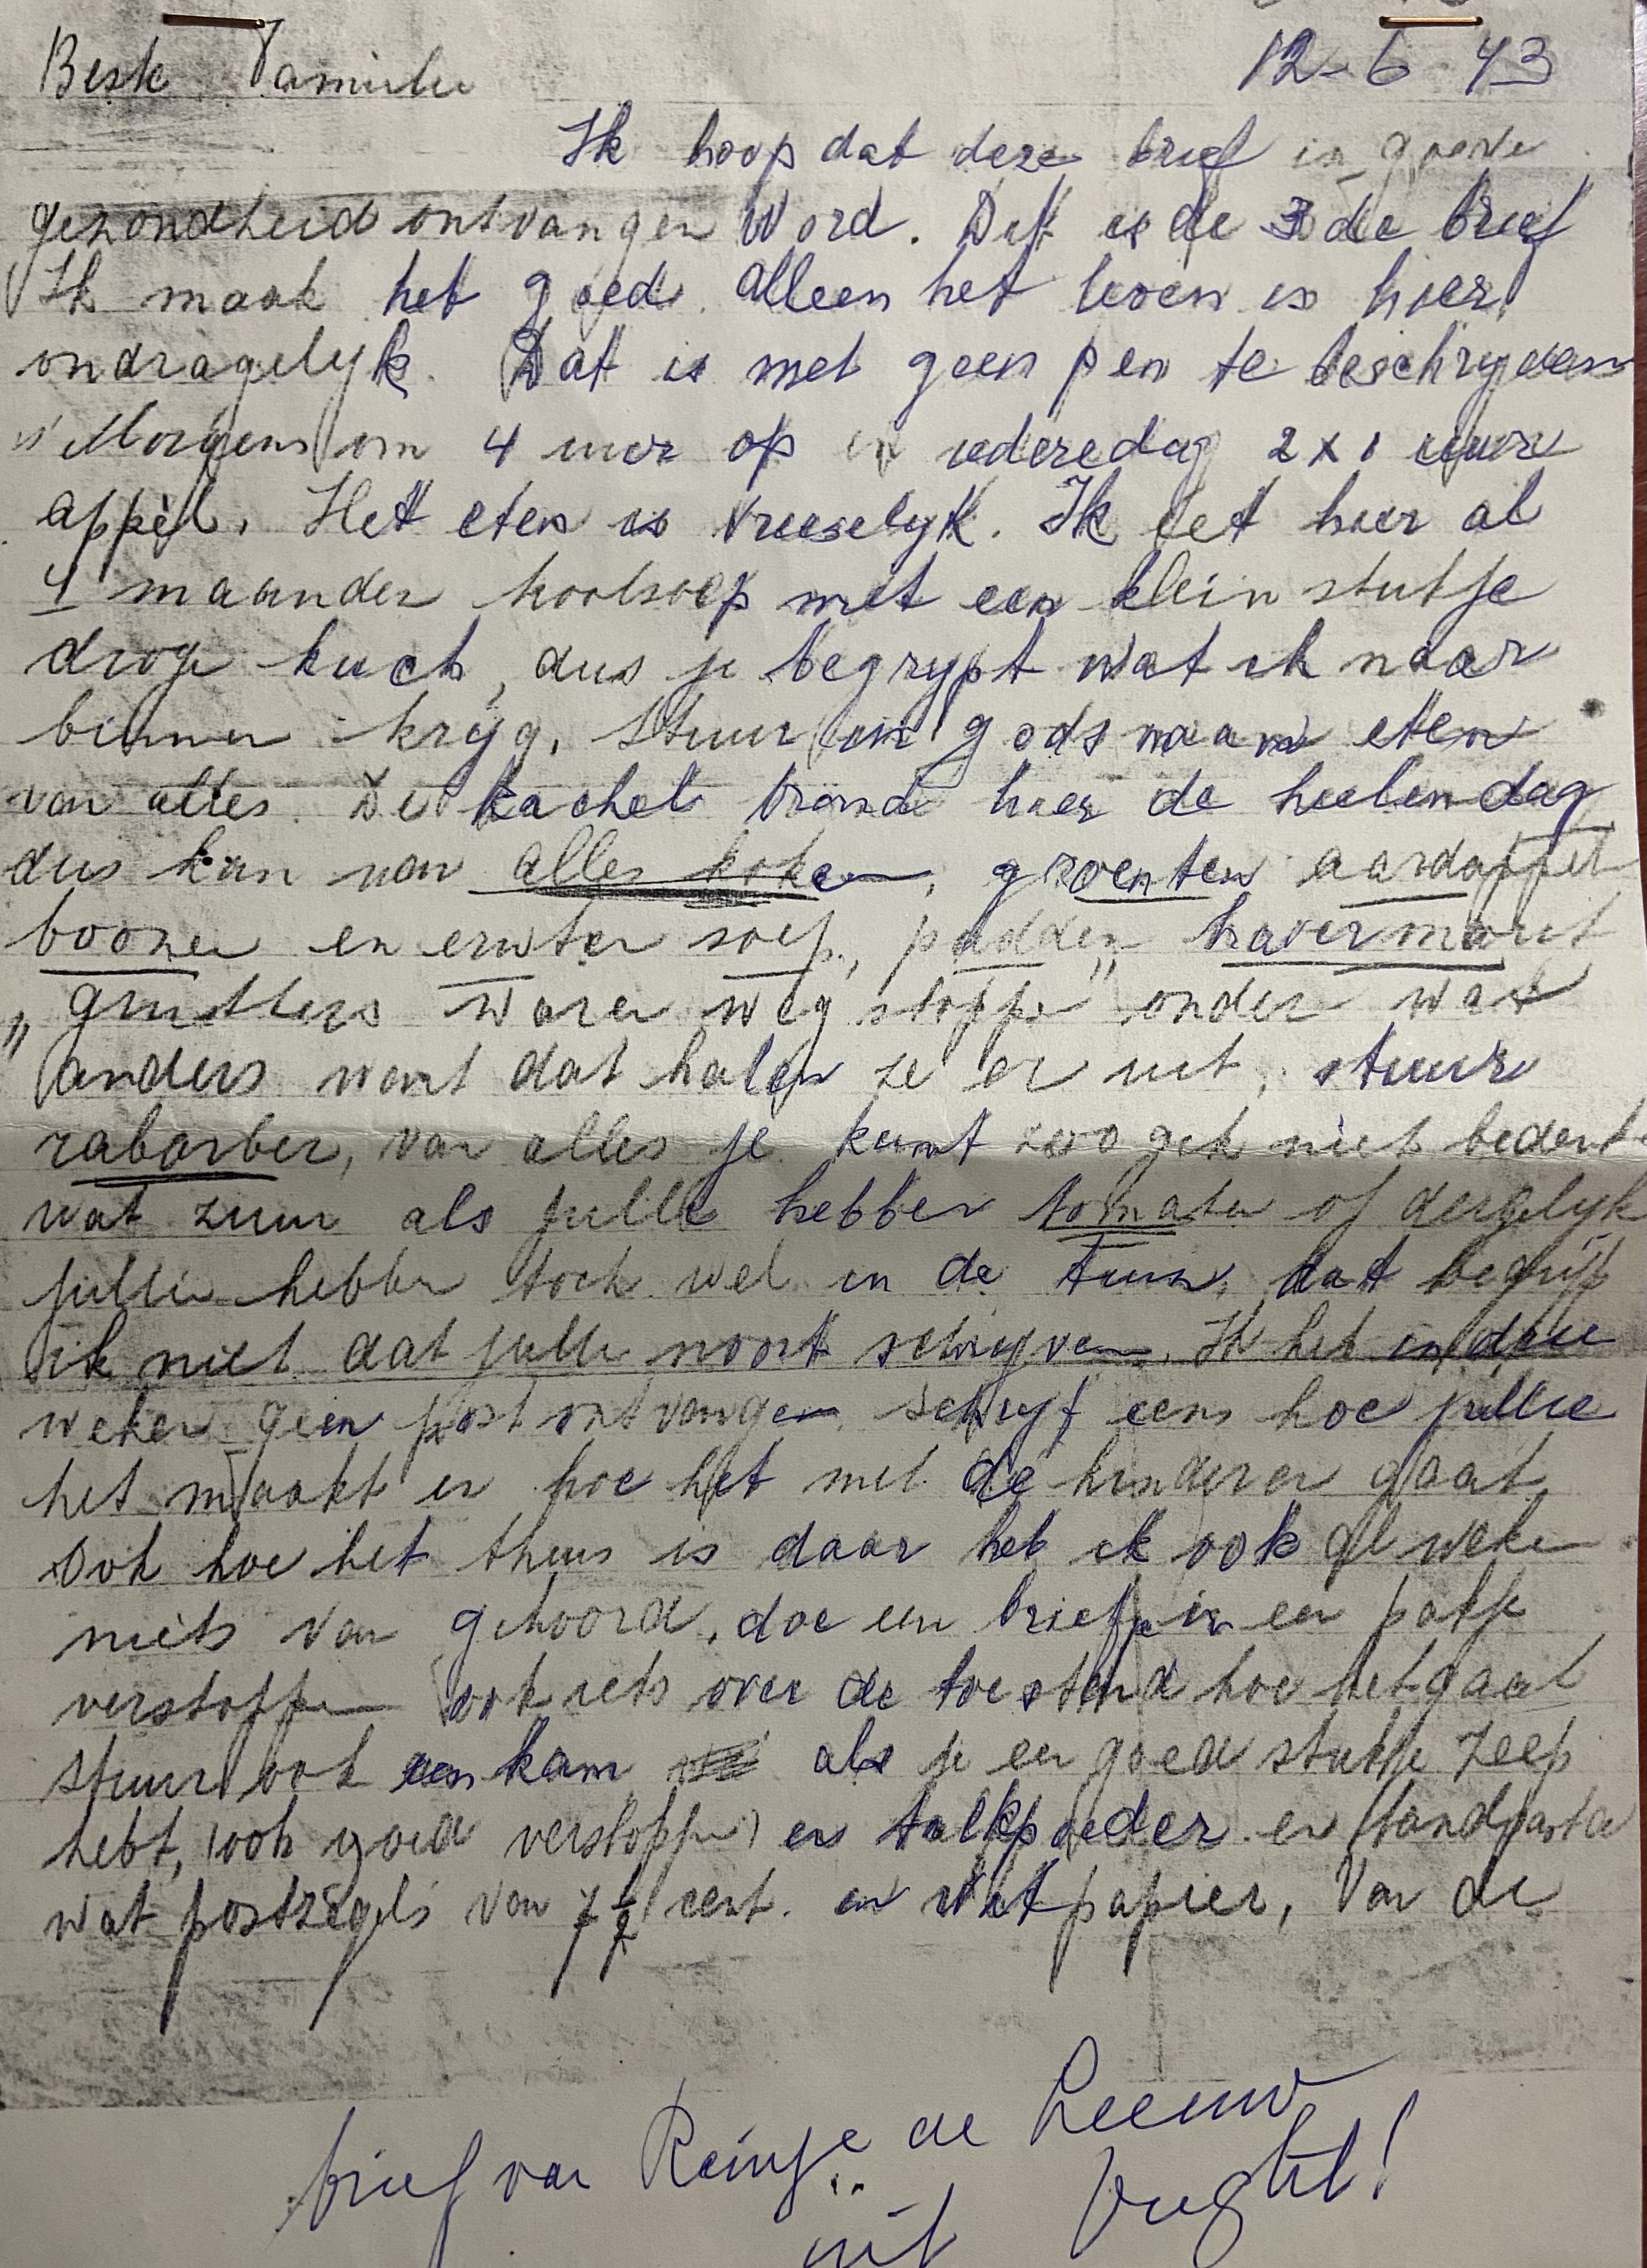 A letter sent from Shaul's aunt to his mother asking that Rosa send her things to help her deal with the deprivations in the concentration camp where she was imprisoned.